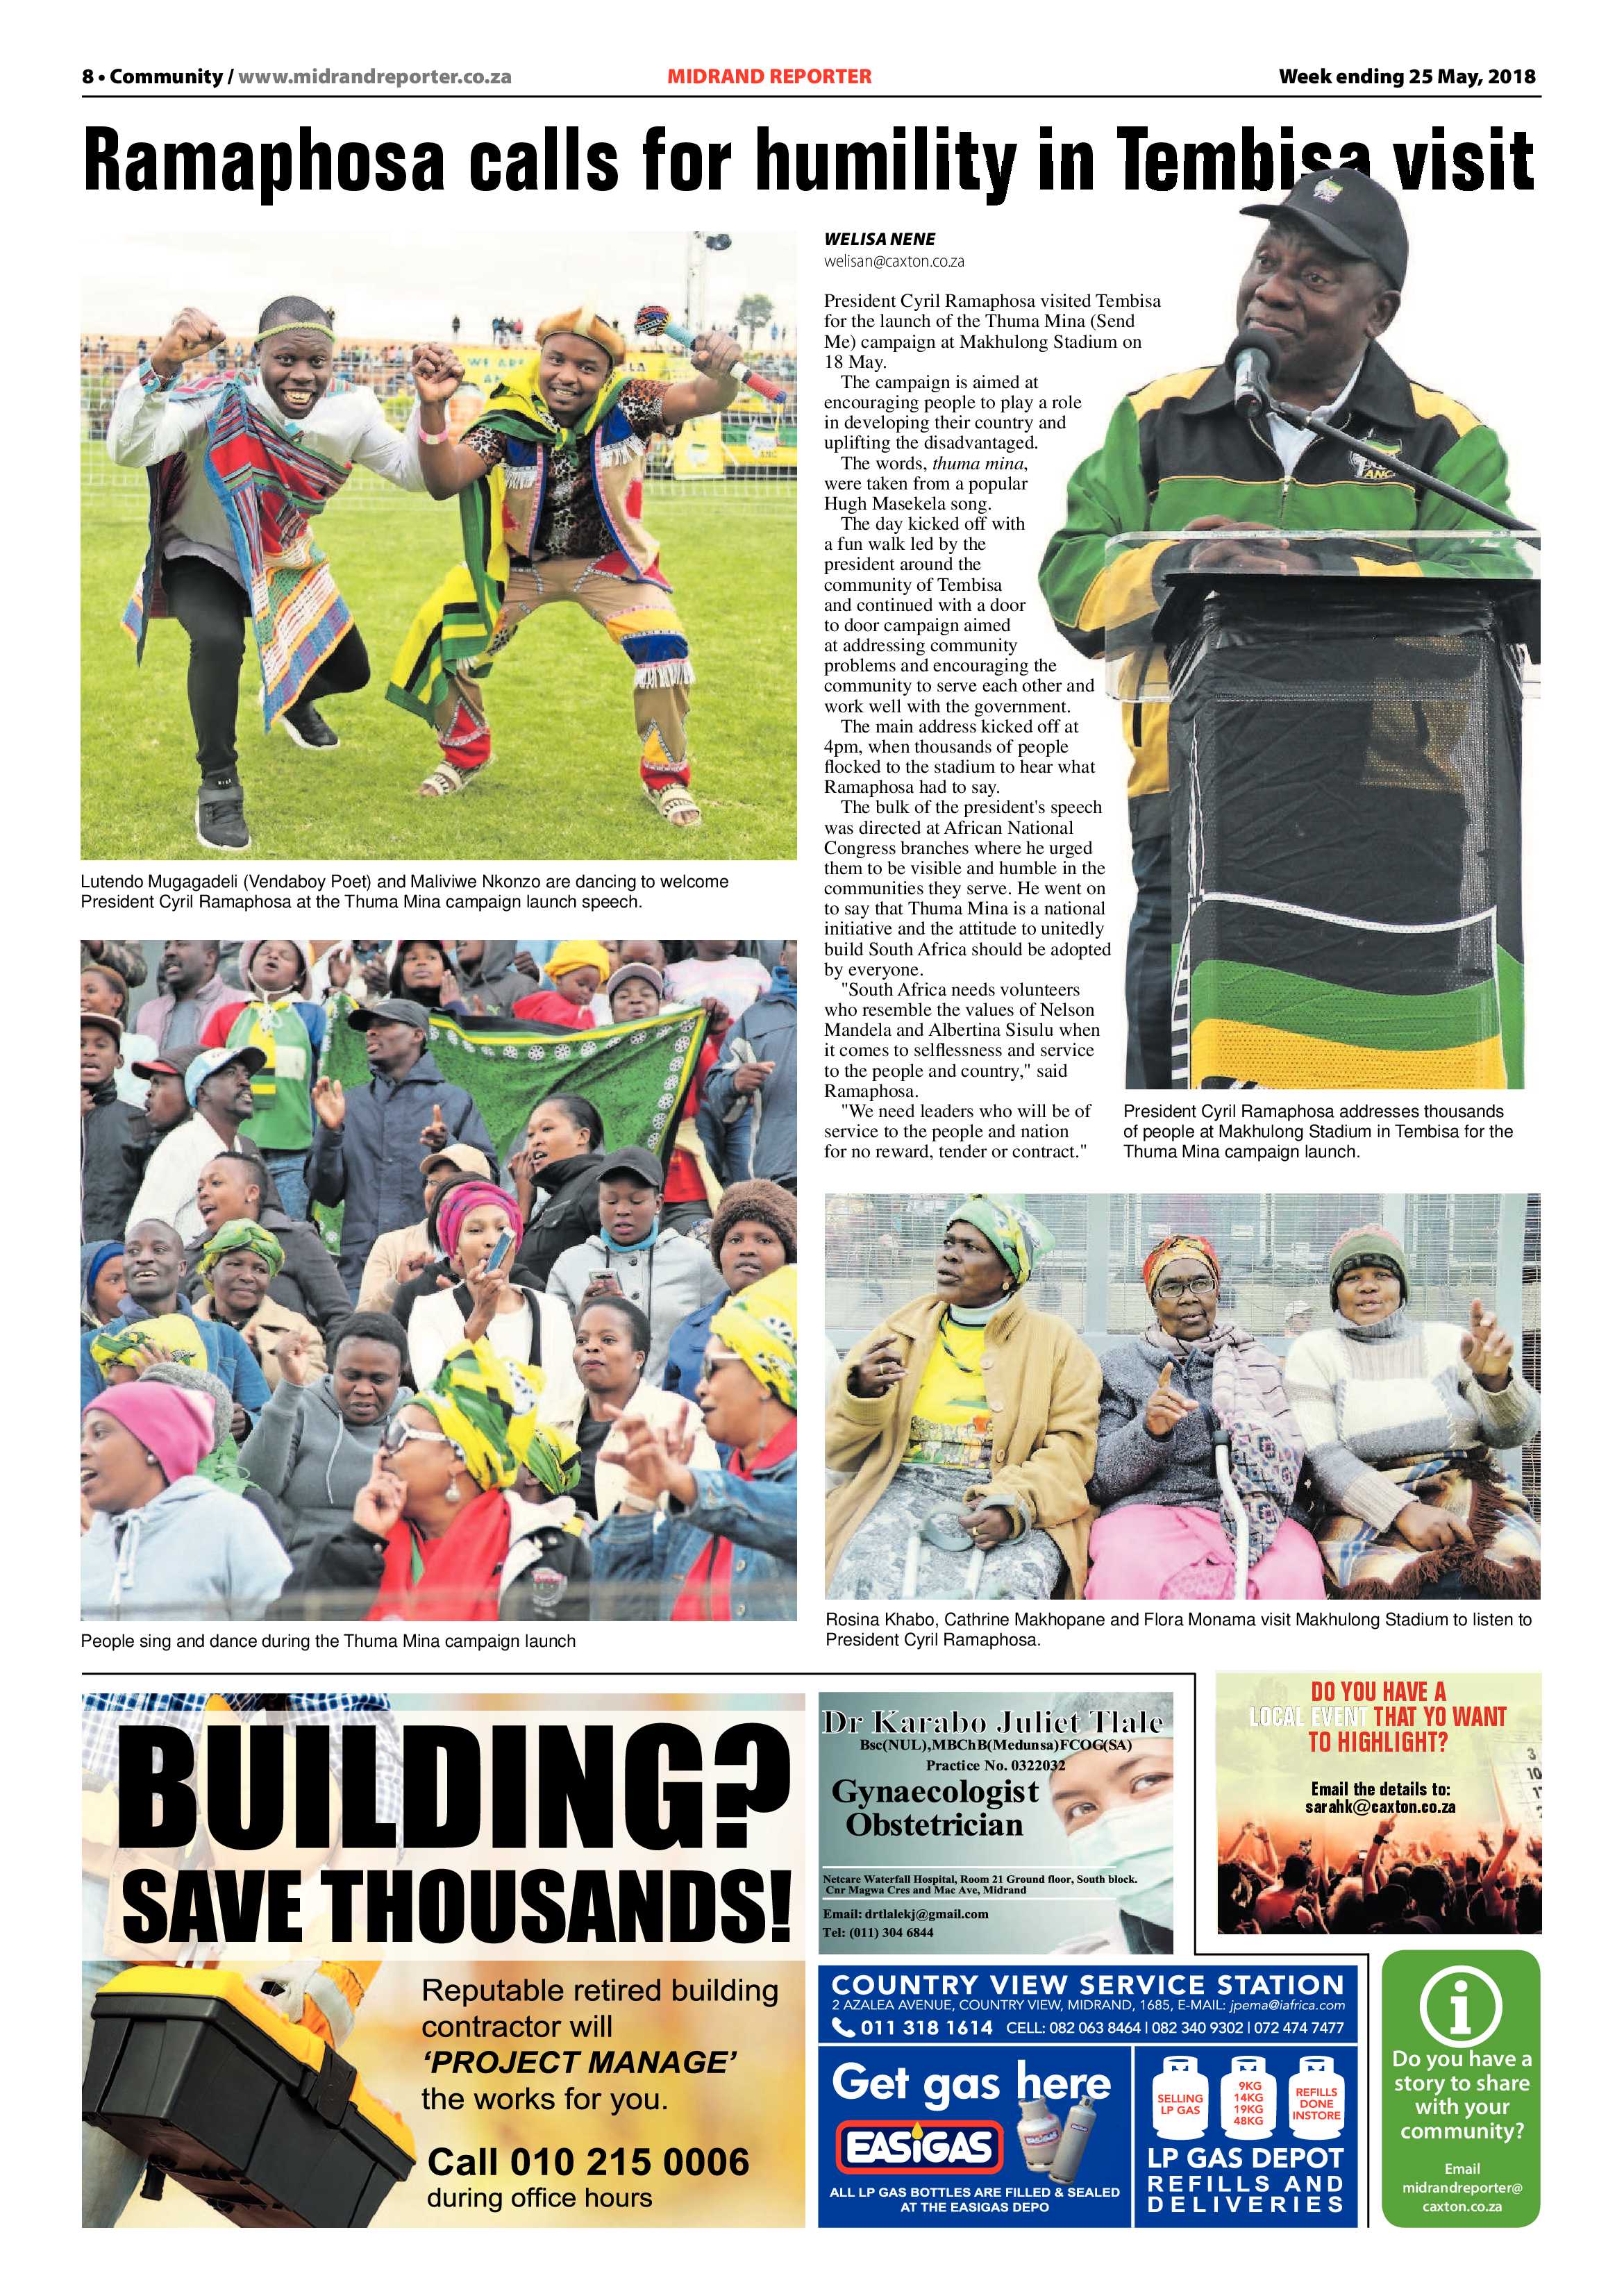 Midrand Reporter 25 May 2018 page 8